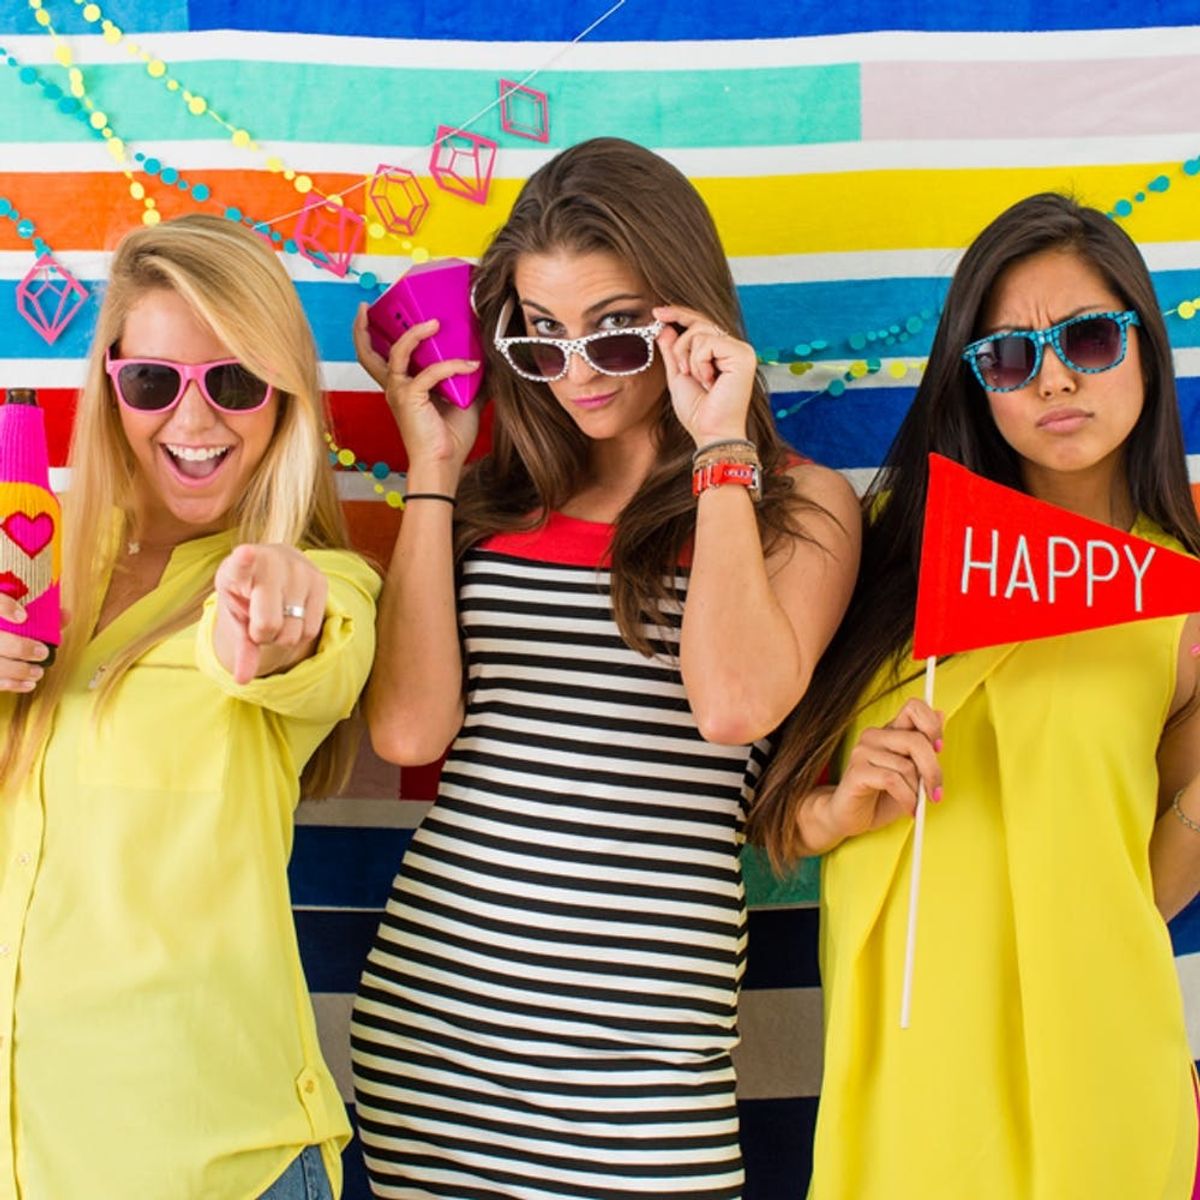 5 Apps That Will Raise the Roof at Your Next Party